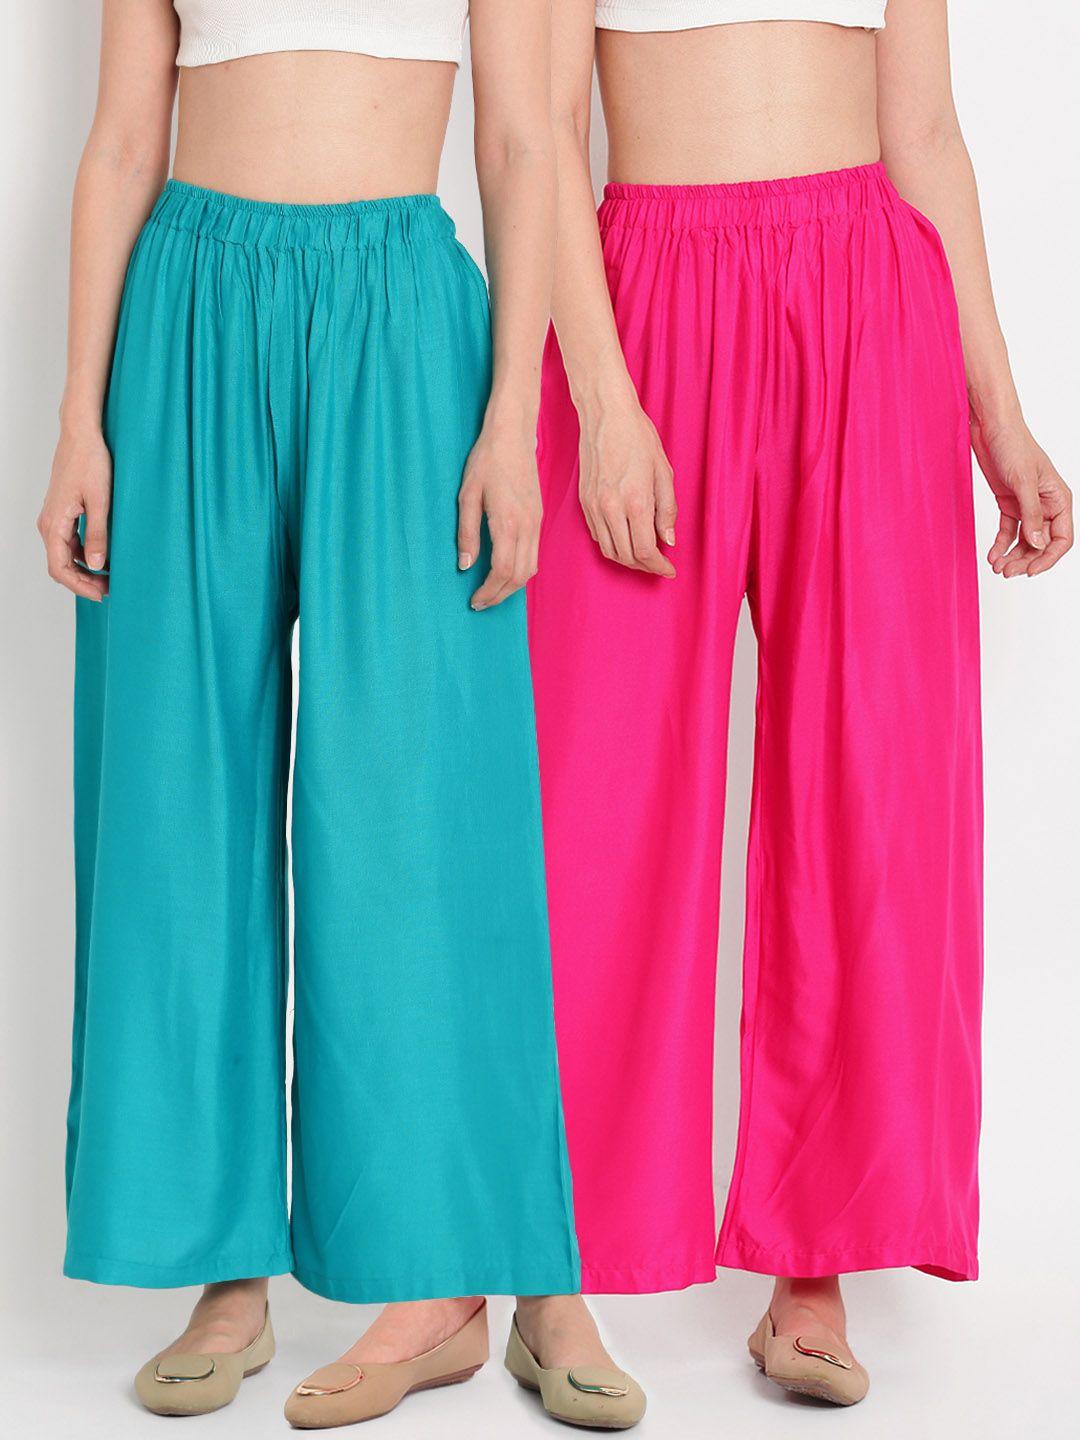 tag 7 women set of 2 pink & teal blue solid flared palazzos